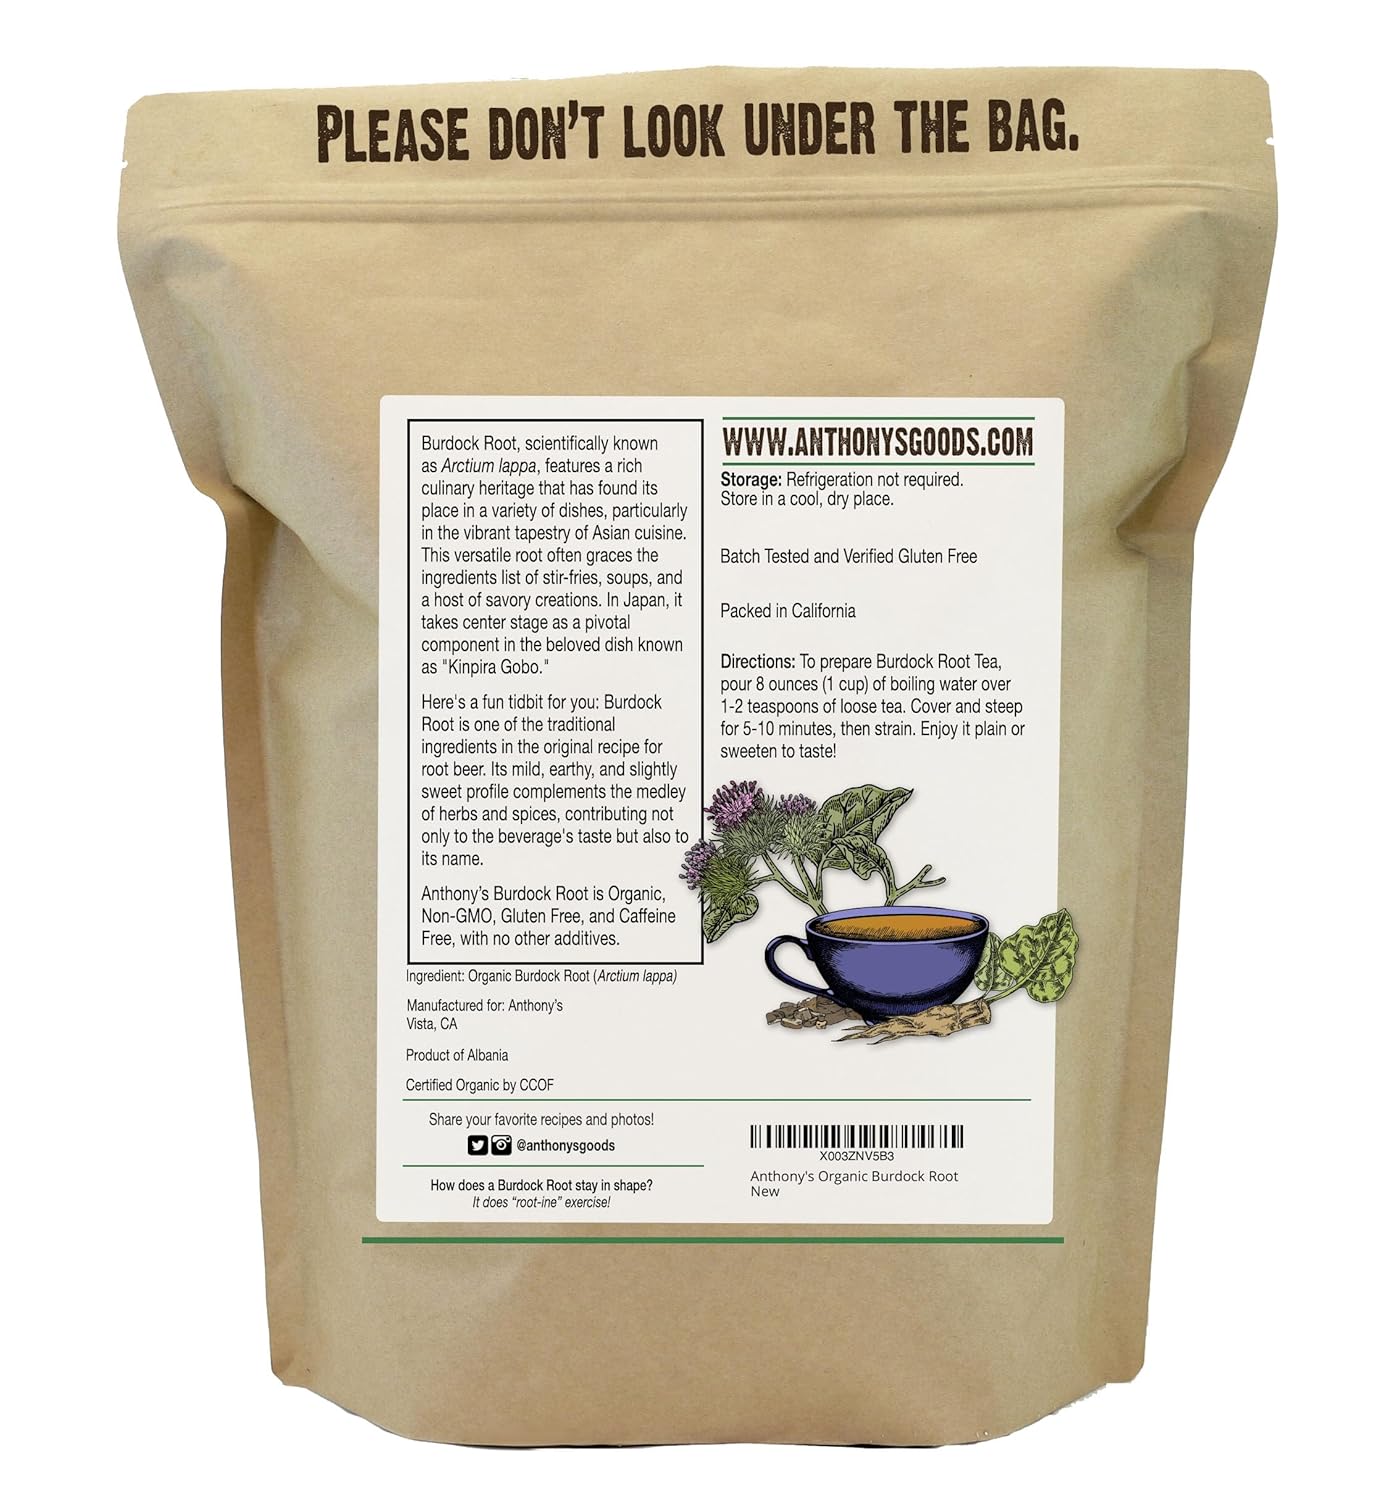 Anthony's Organic Burdock Root, 1 lb, Gluten Free, Cut & Sifted, Non GMO, Caffeine Free : Grocery & Gourmet Food